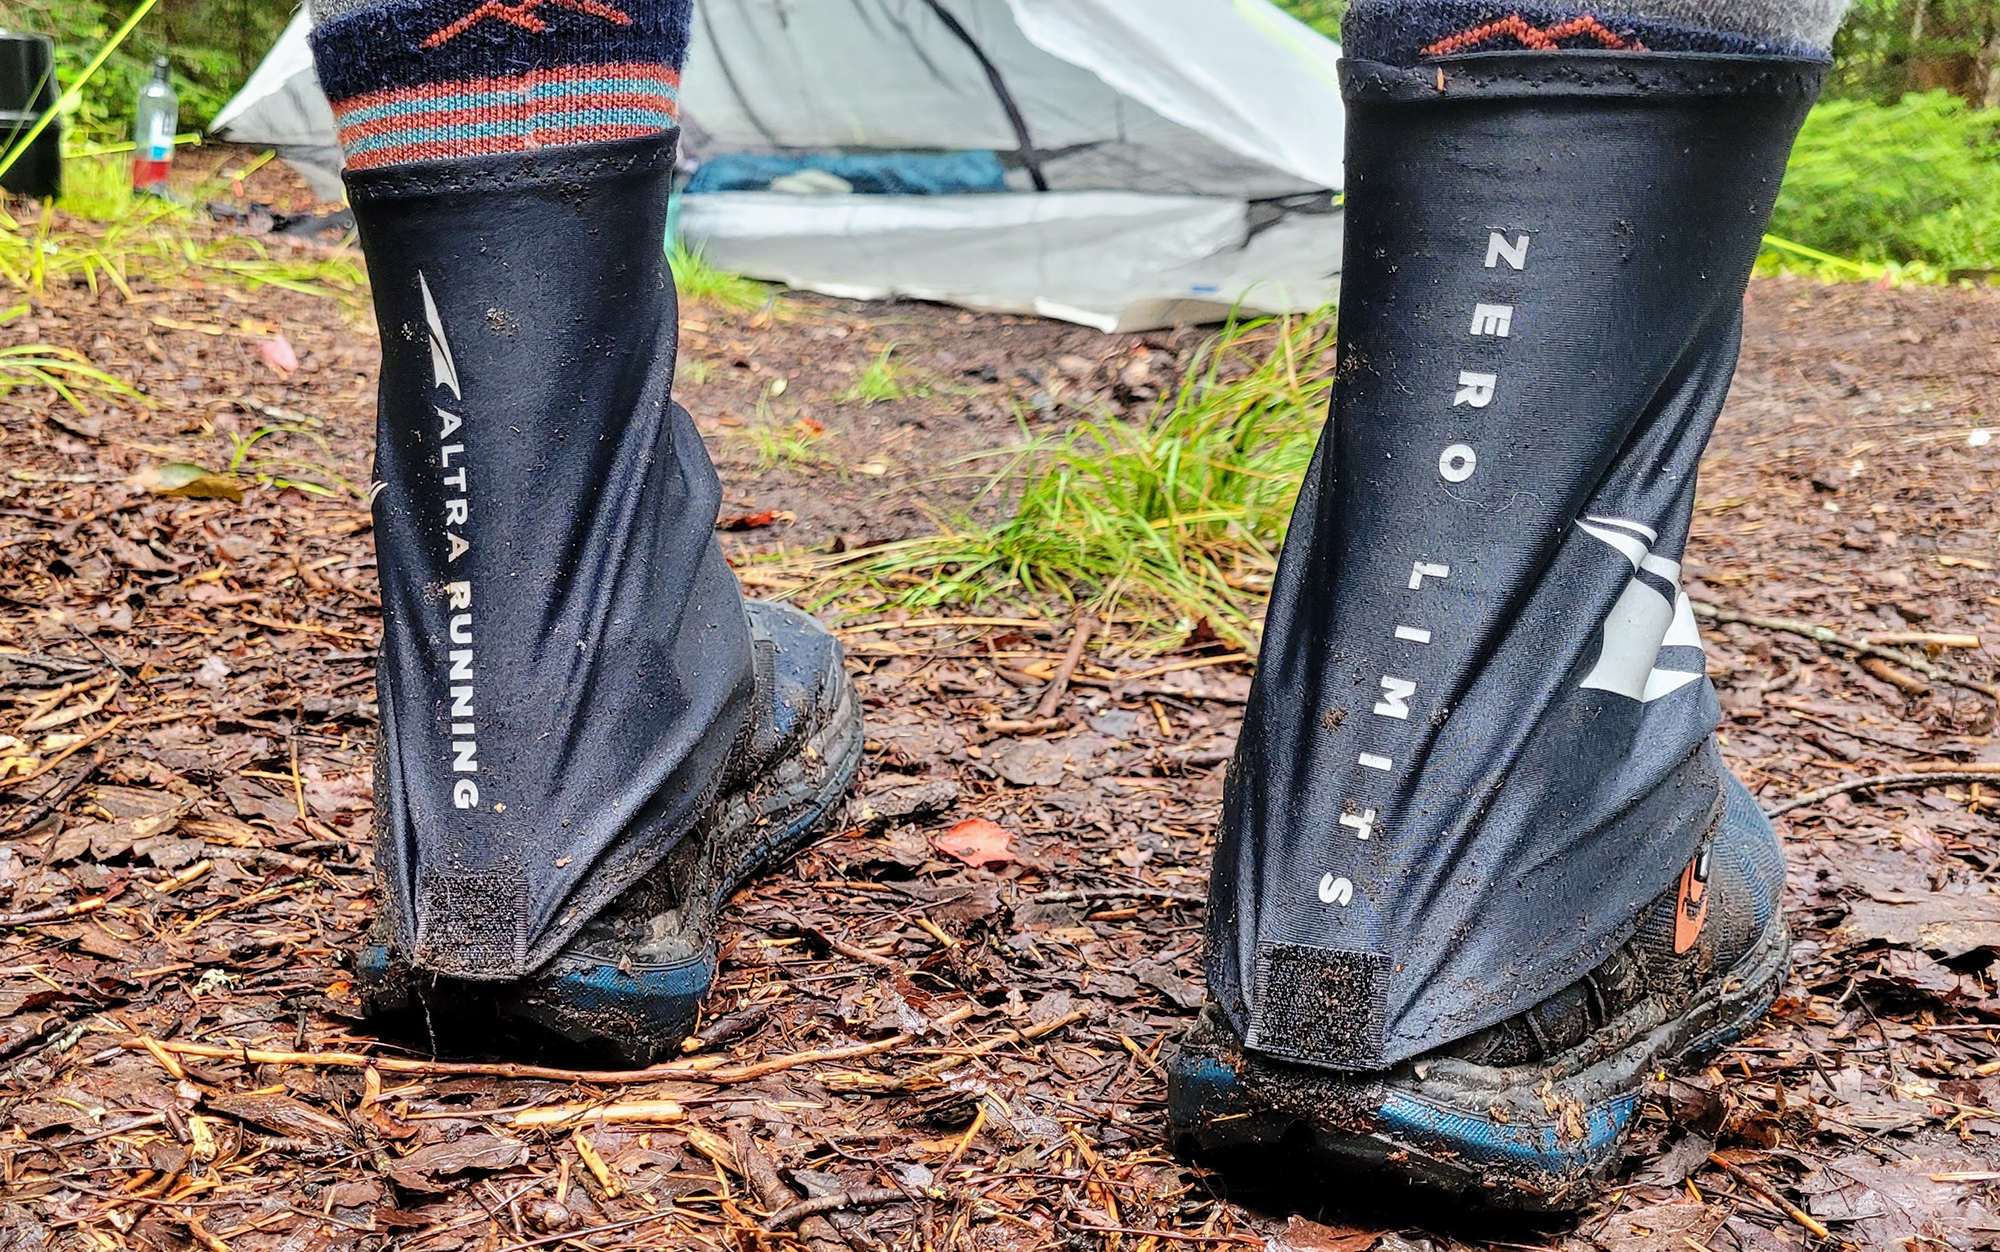 We tested the Altra Trail Gaiter.